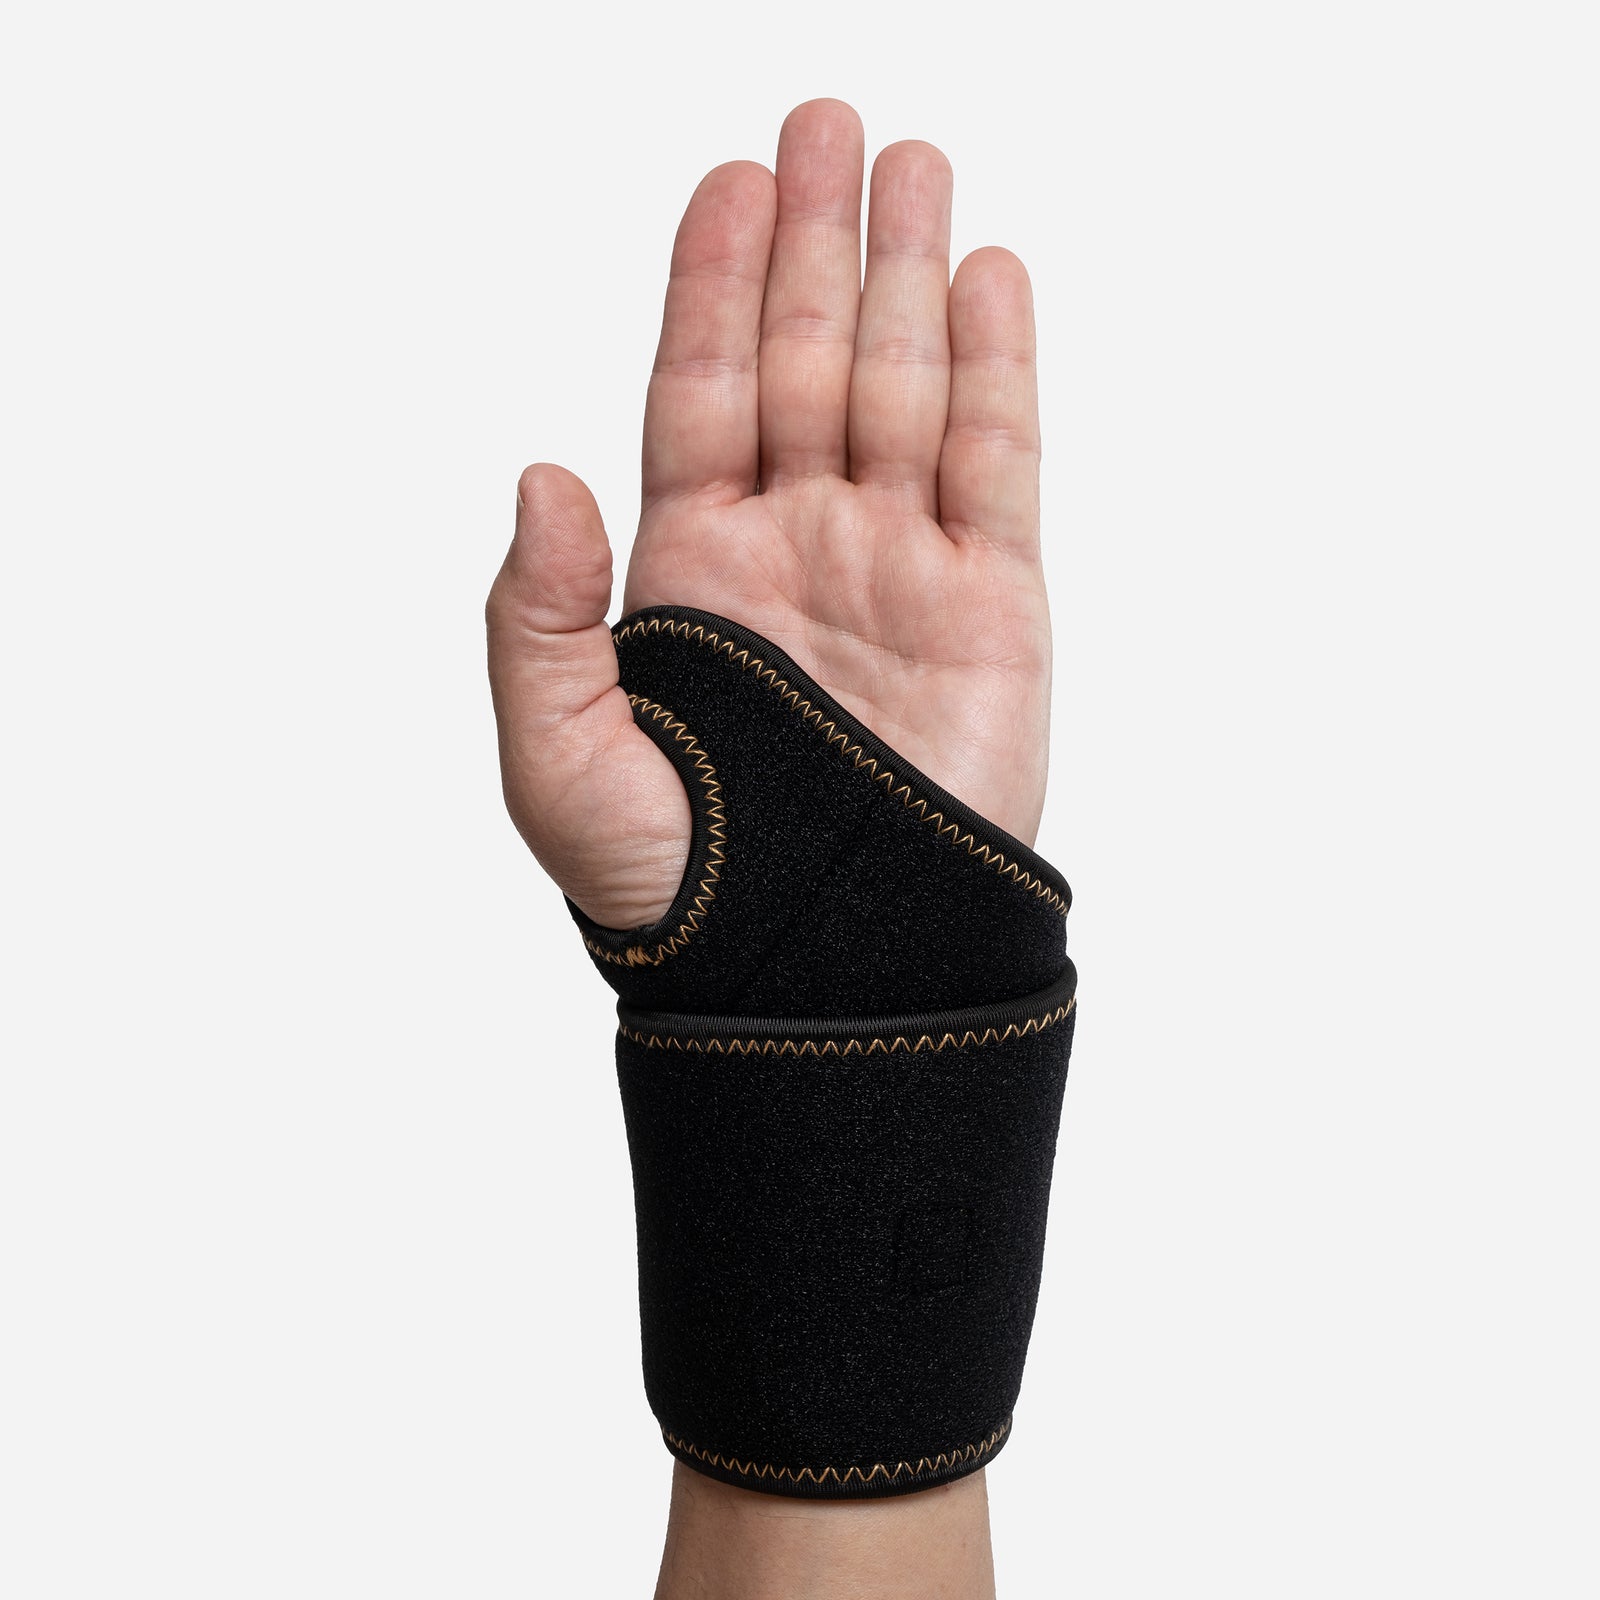 Best Deal in Canada  Copper Fit Wrist Relief Compression Rhand-L Xl  HB-CFSPBRCRXL - Canada's best deals on Electronics, TVs, Unlocked Cell  Phones, Macbooks, Laptops, Kitchen Appliances, Toys, Bed and Bathroom  products